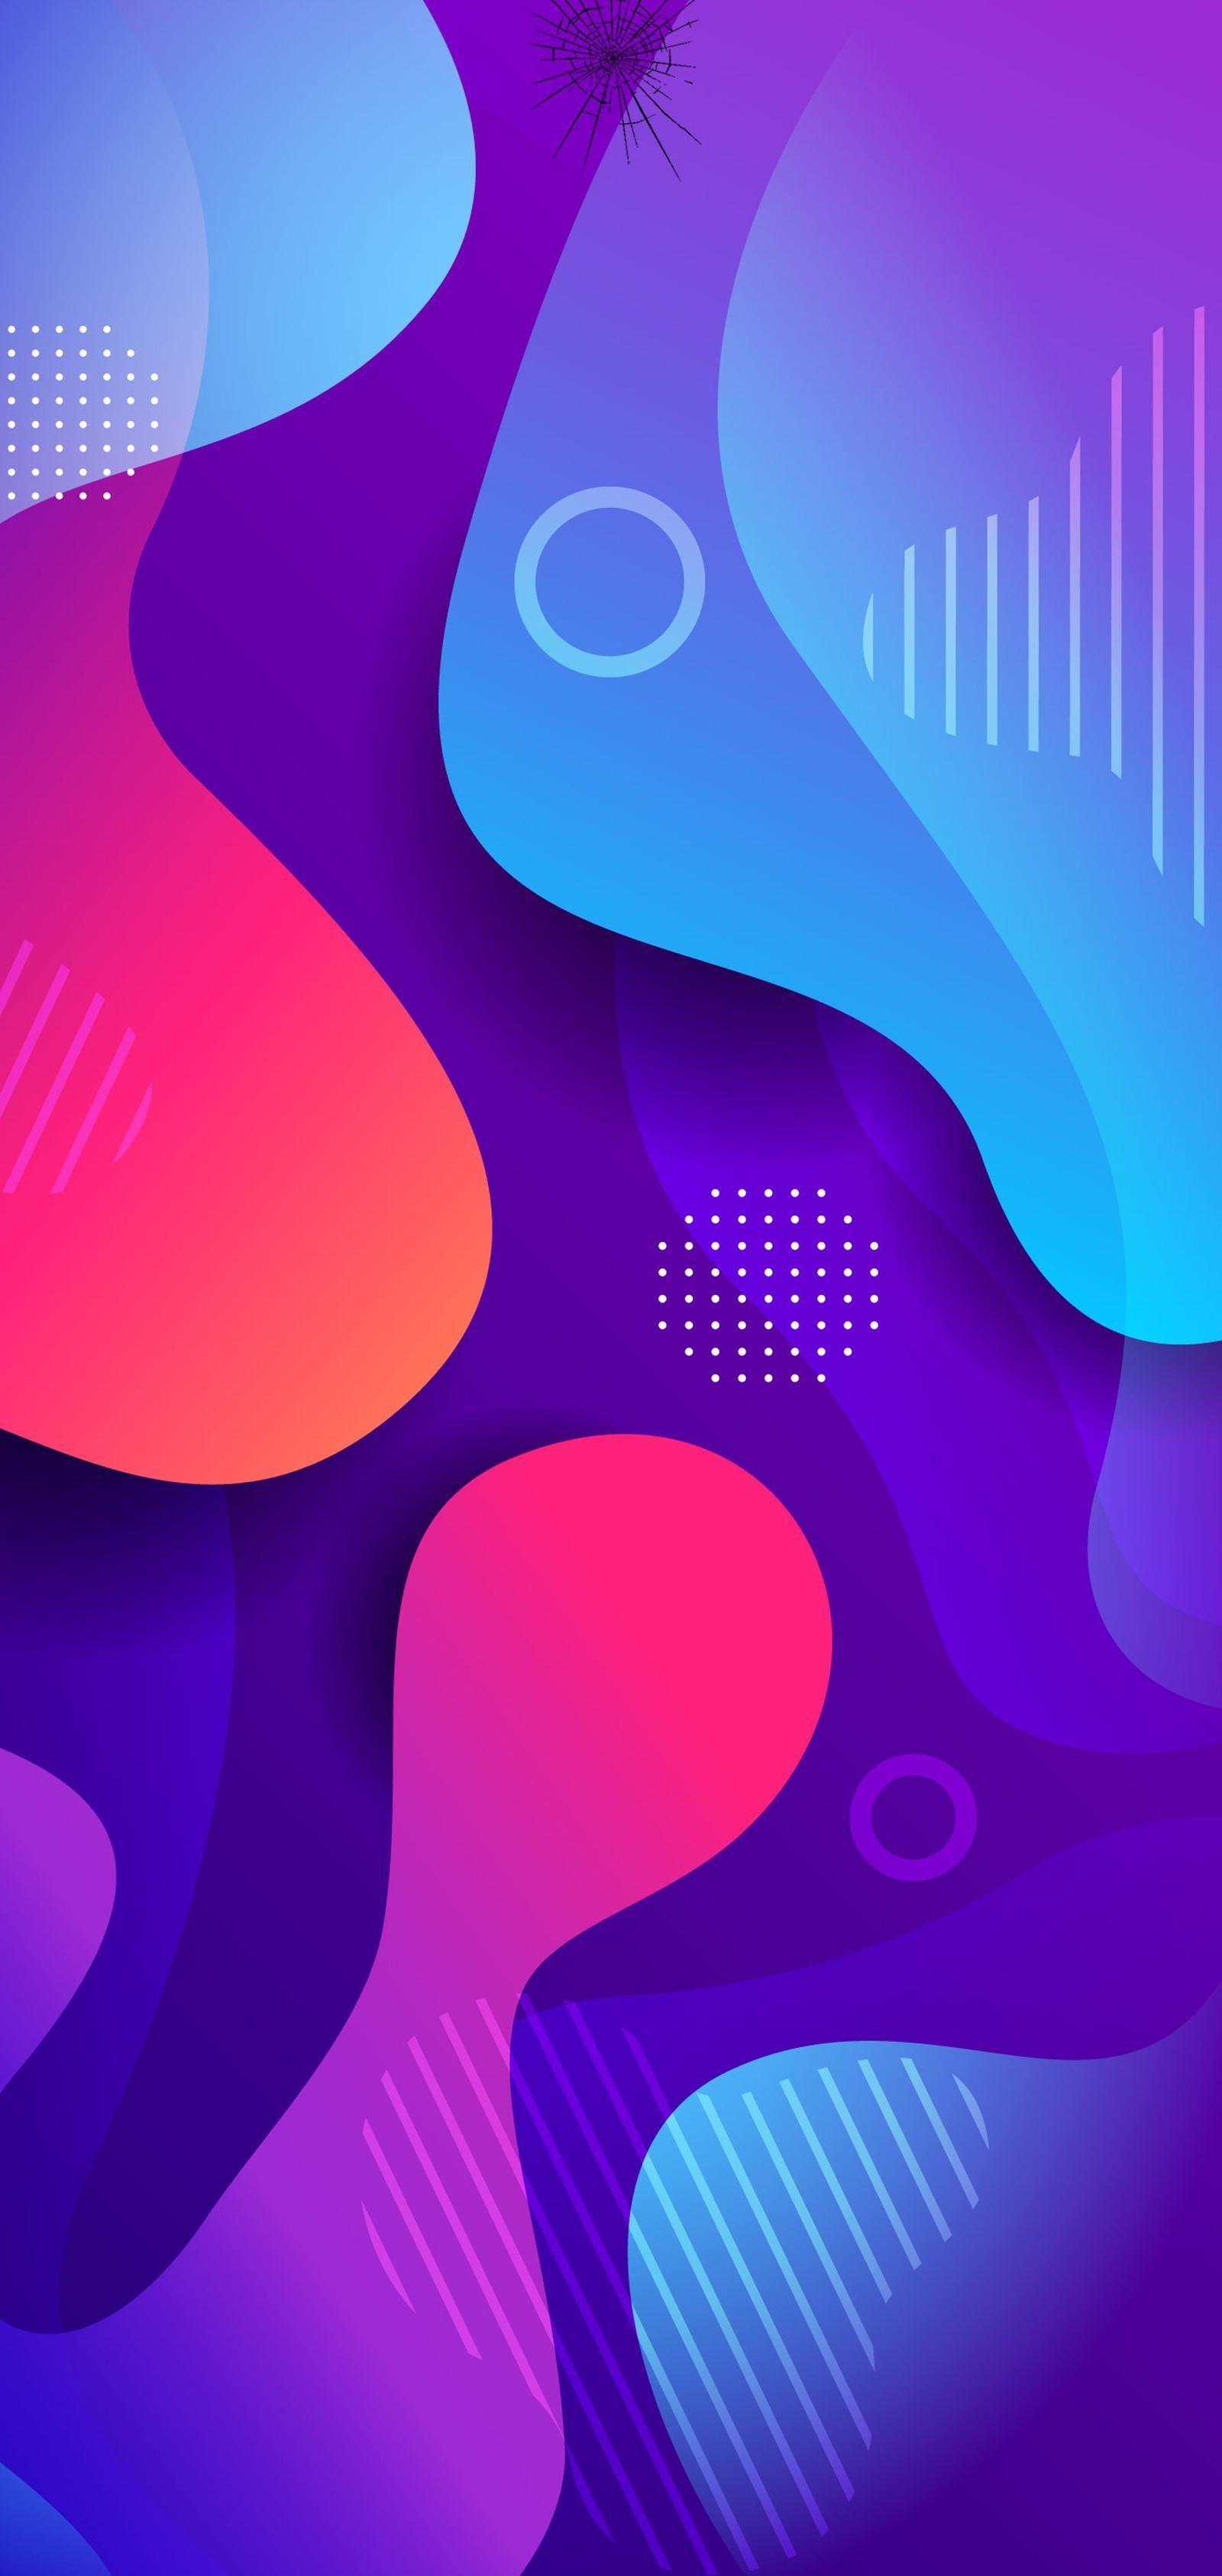 Note 10 Wallpapers HD High Resolution 